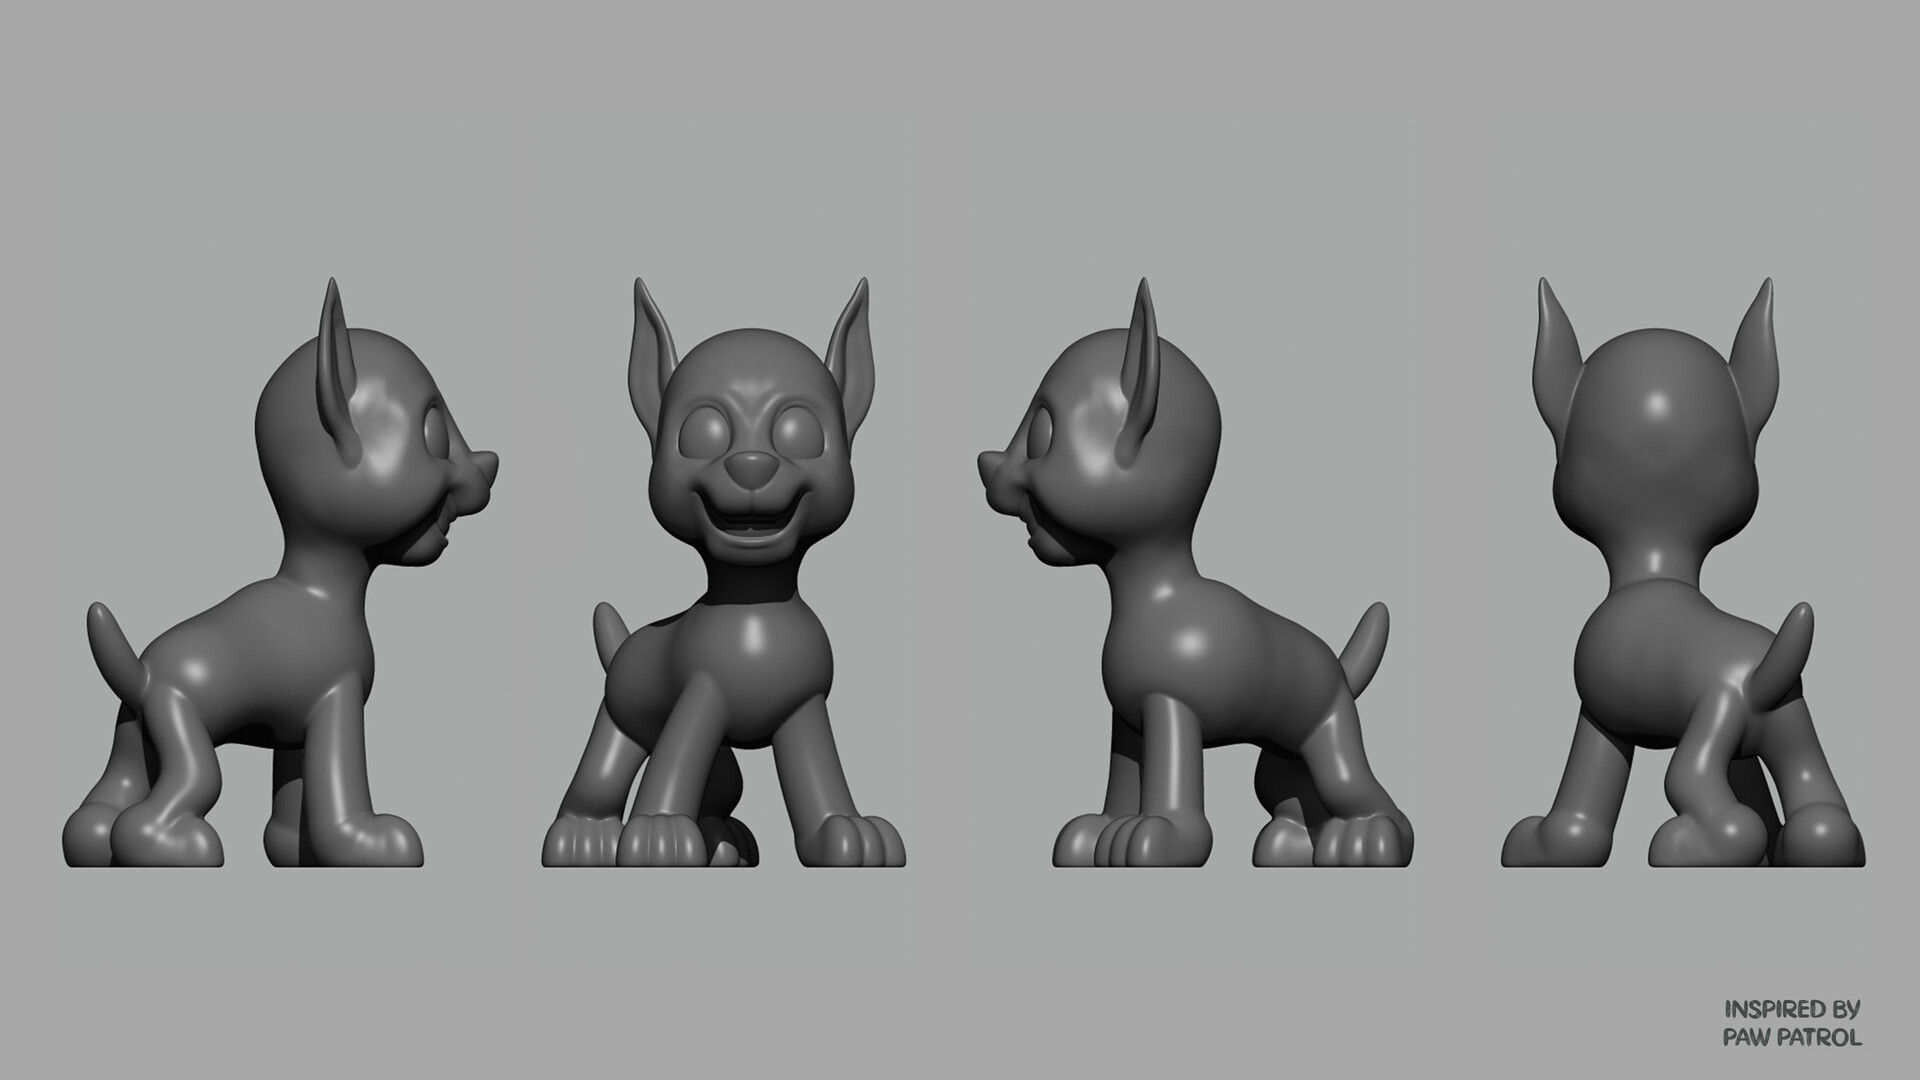 Paw Patrol - A 3D model collection by baughb - Sketchfab